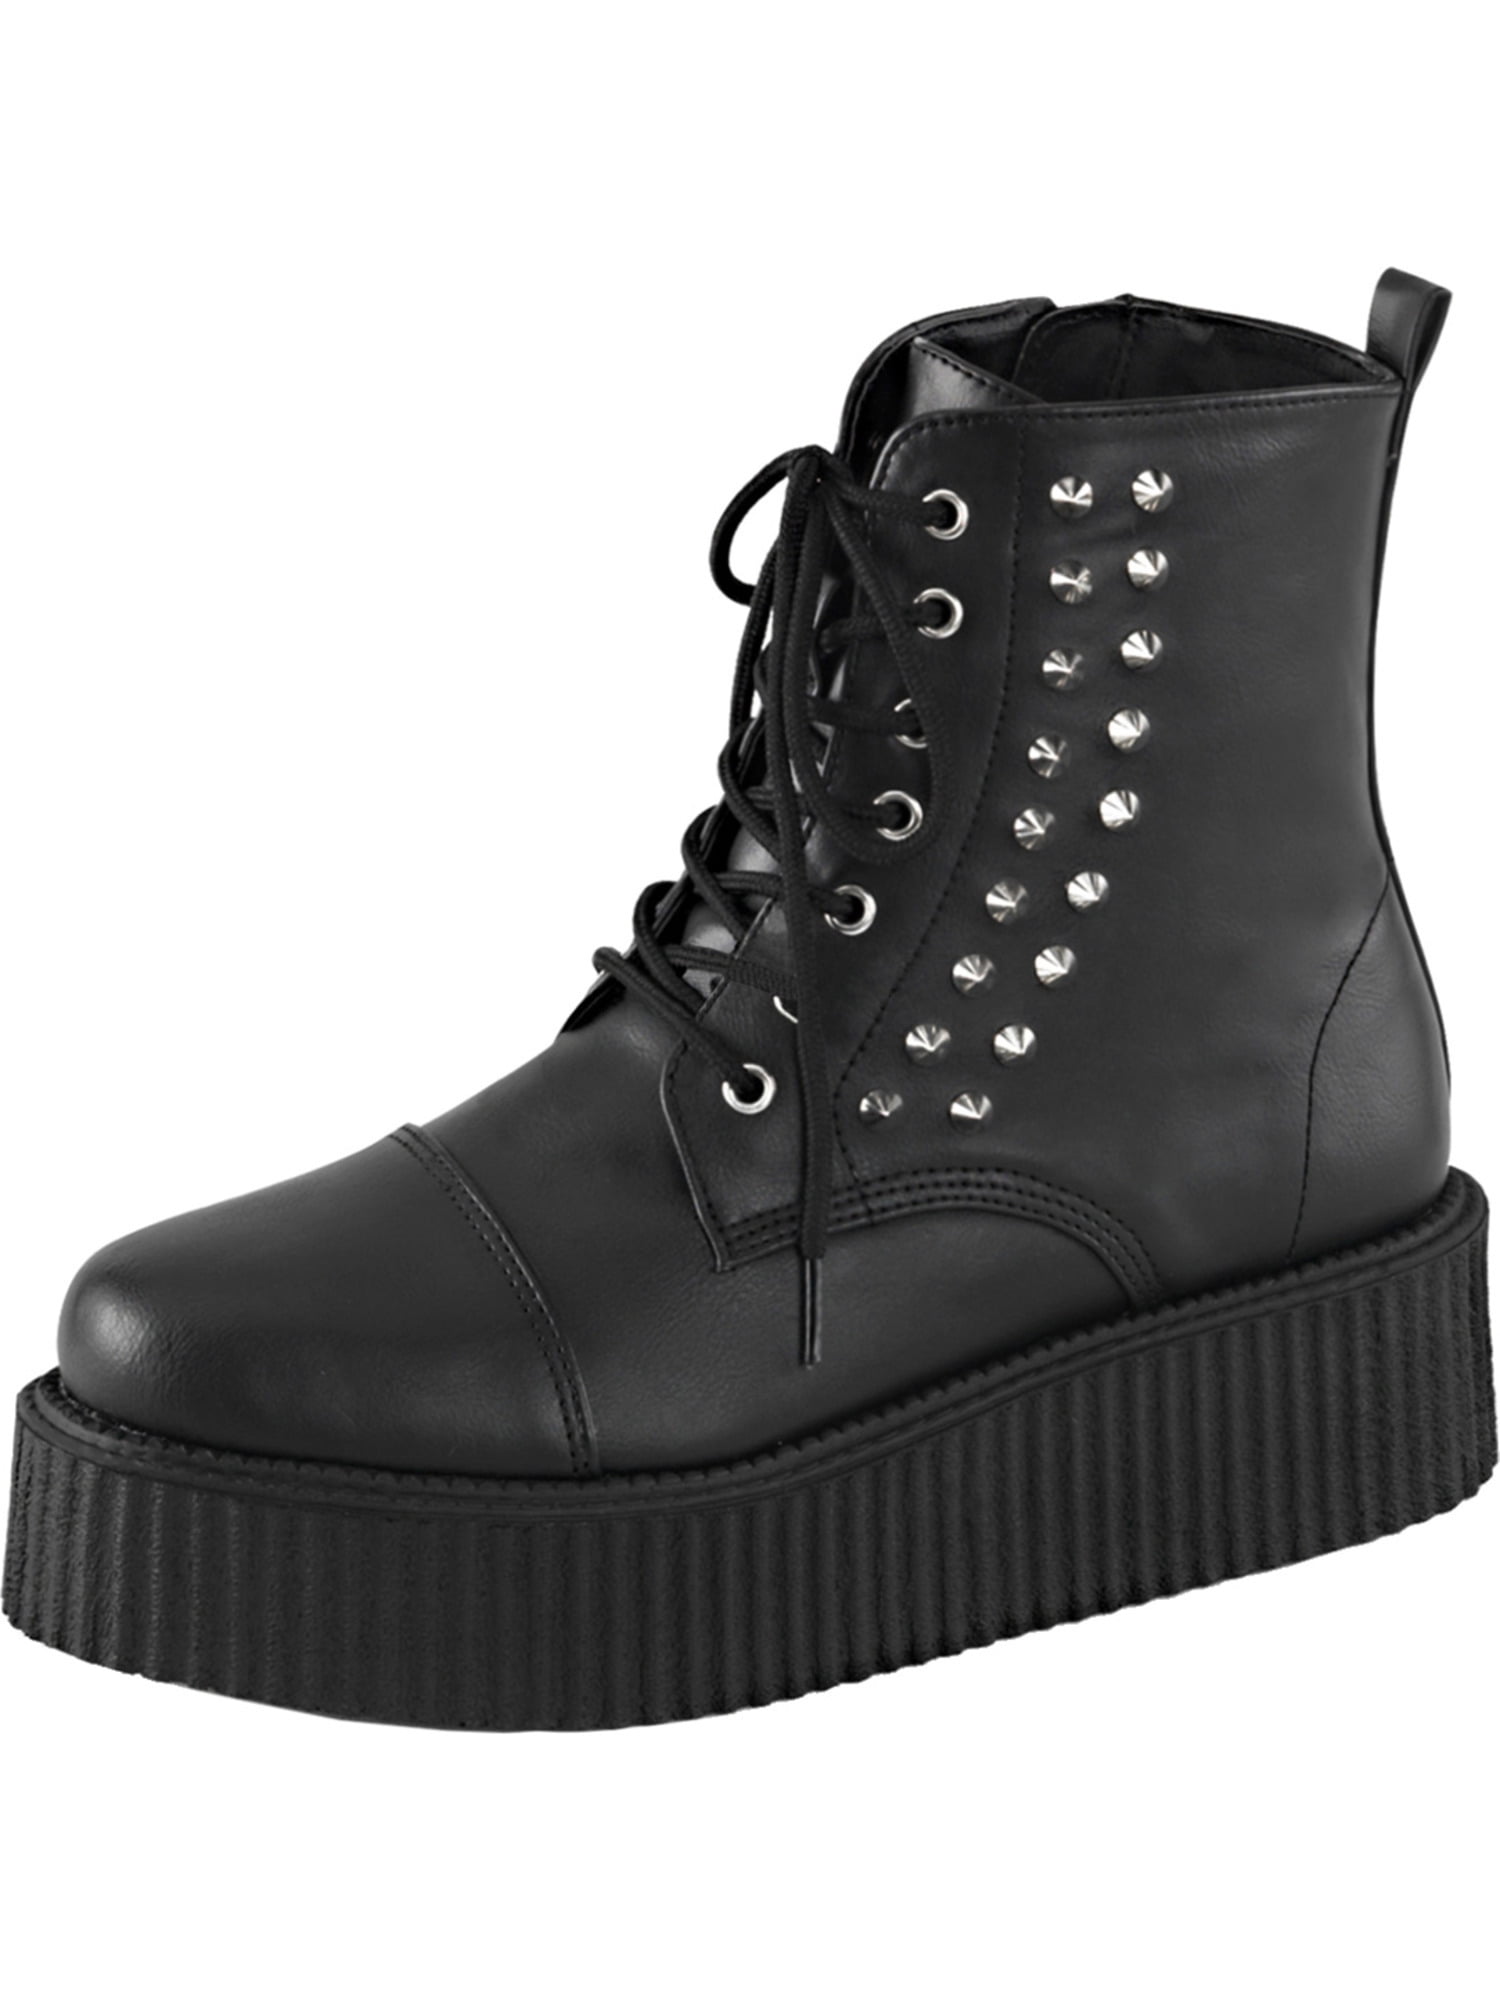 Demonia - Mens Gothic Boots Studded Booties Black Creepers Shoes Spikes ...